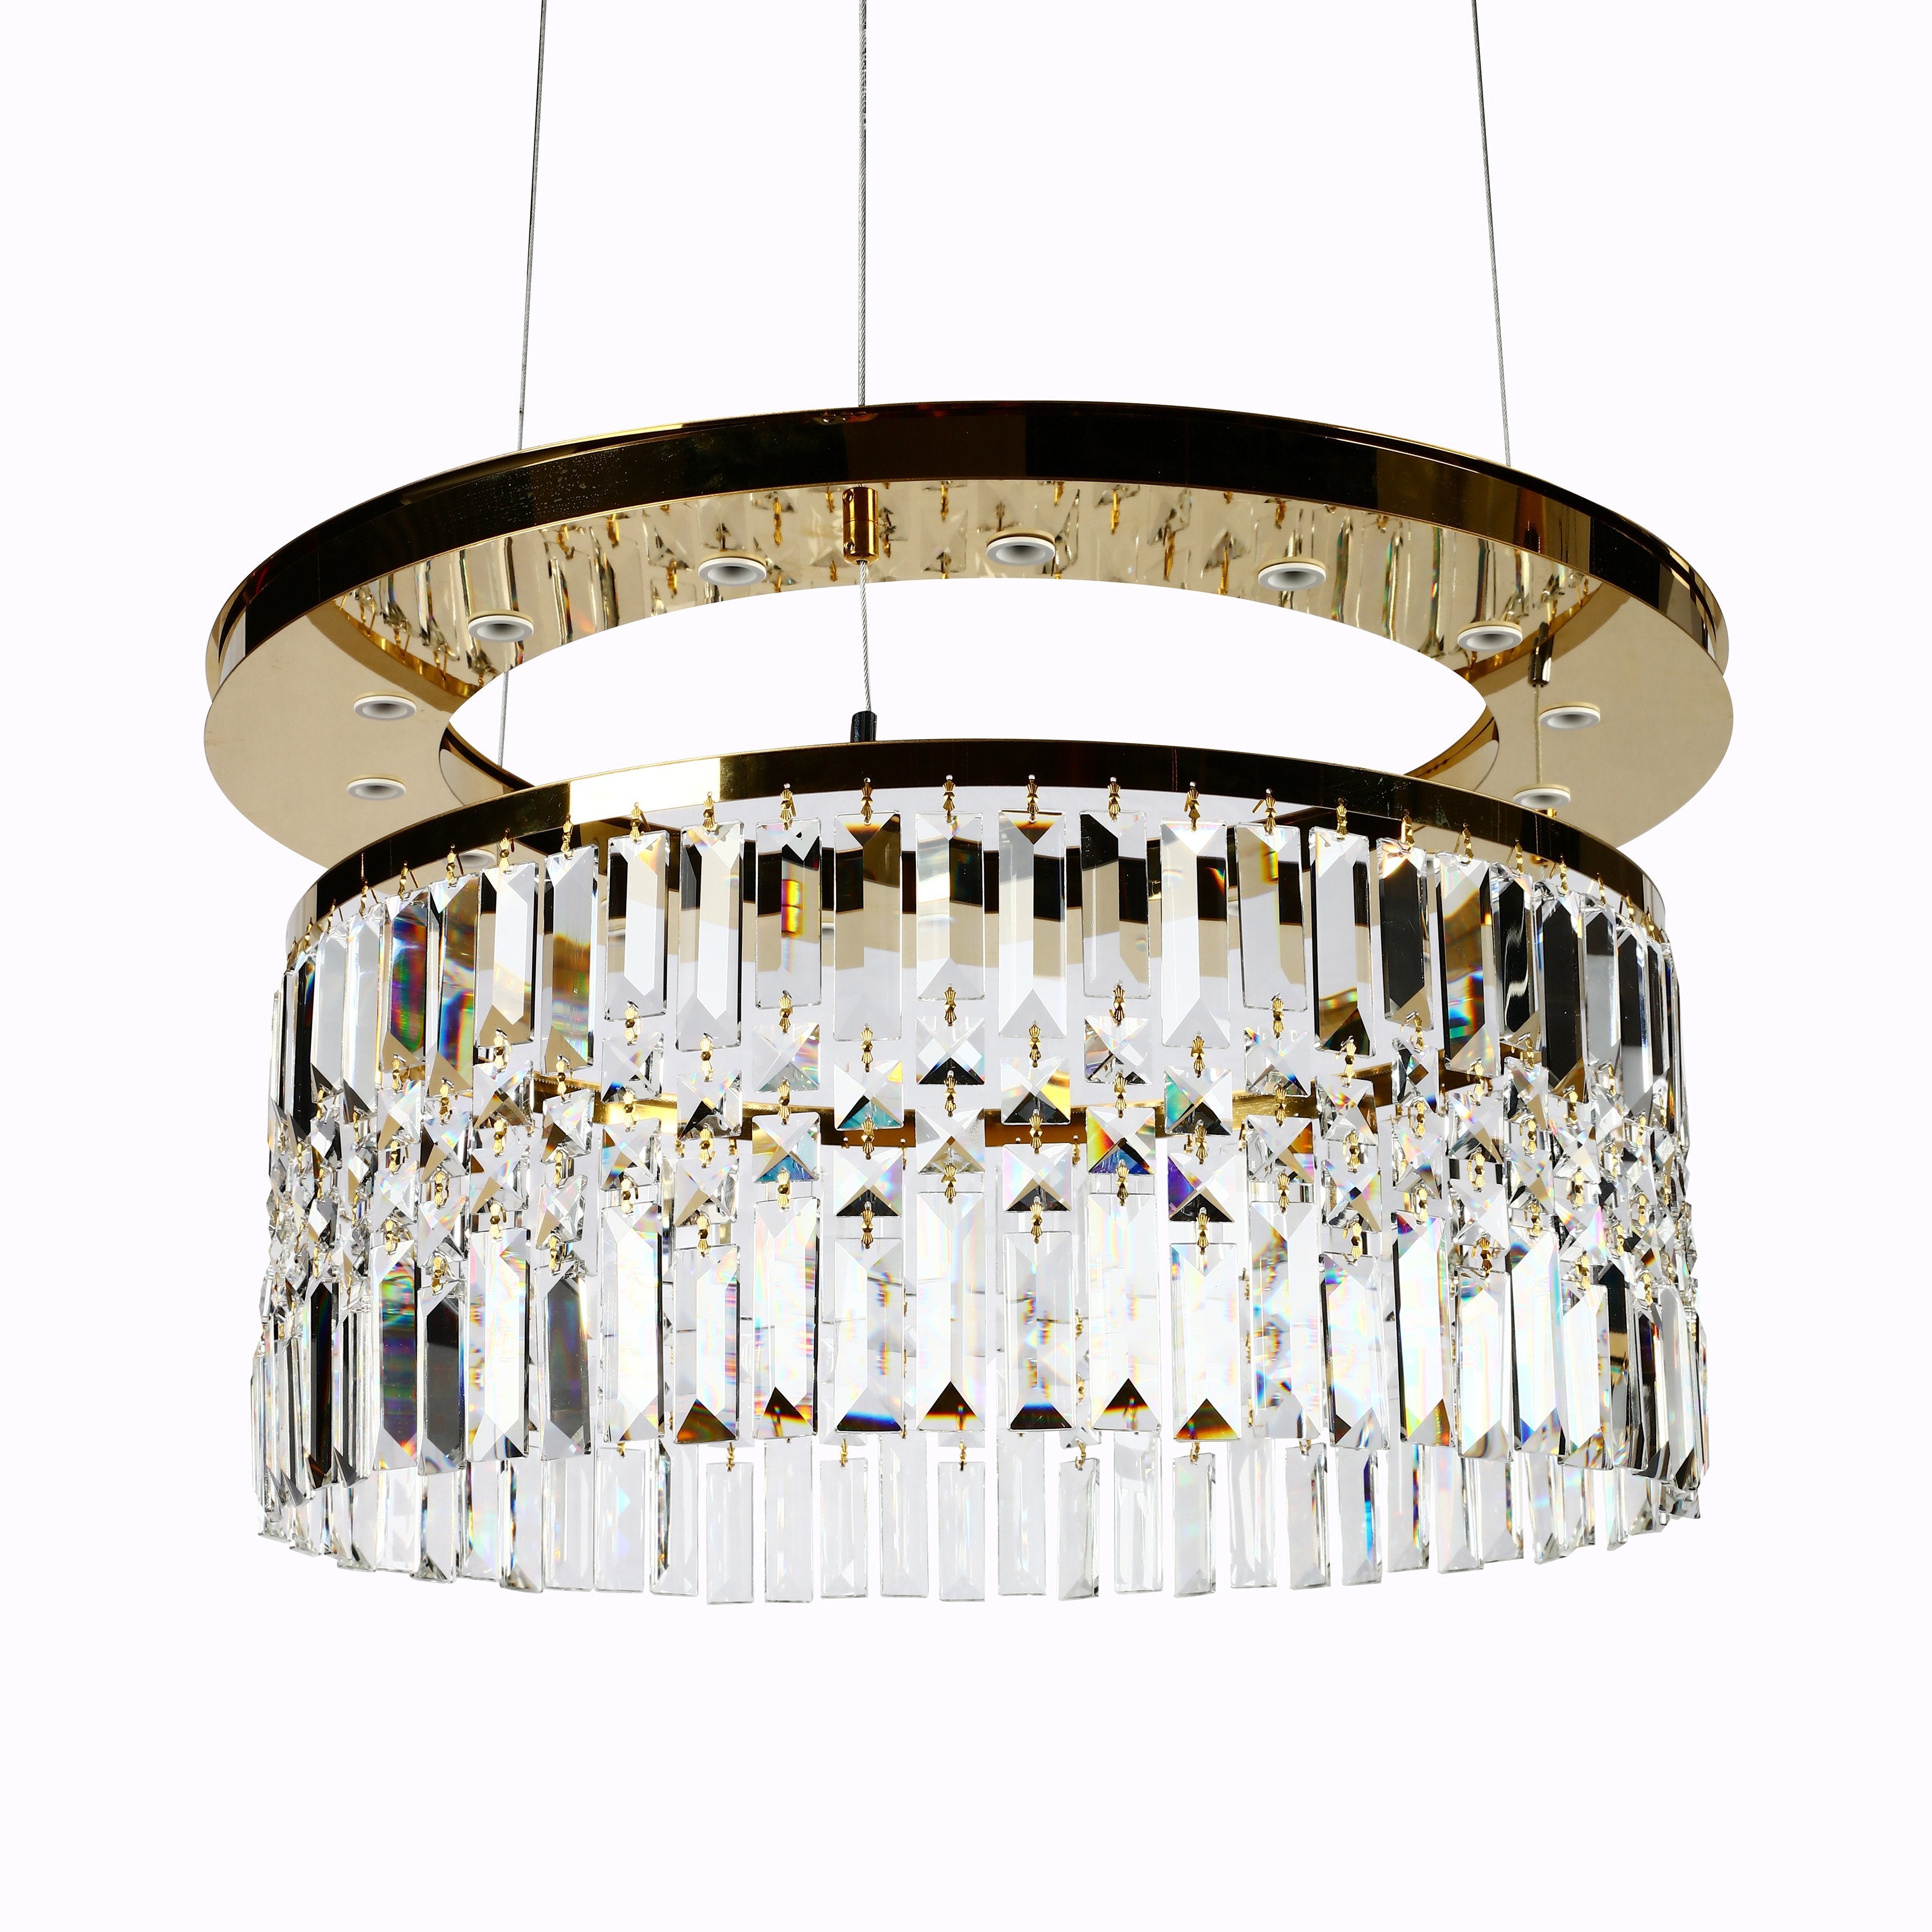 Ares Ring Odeon LED Pendant Light - Italian Concept - 